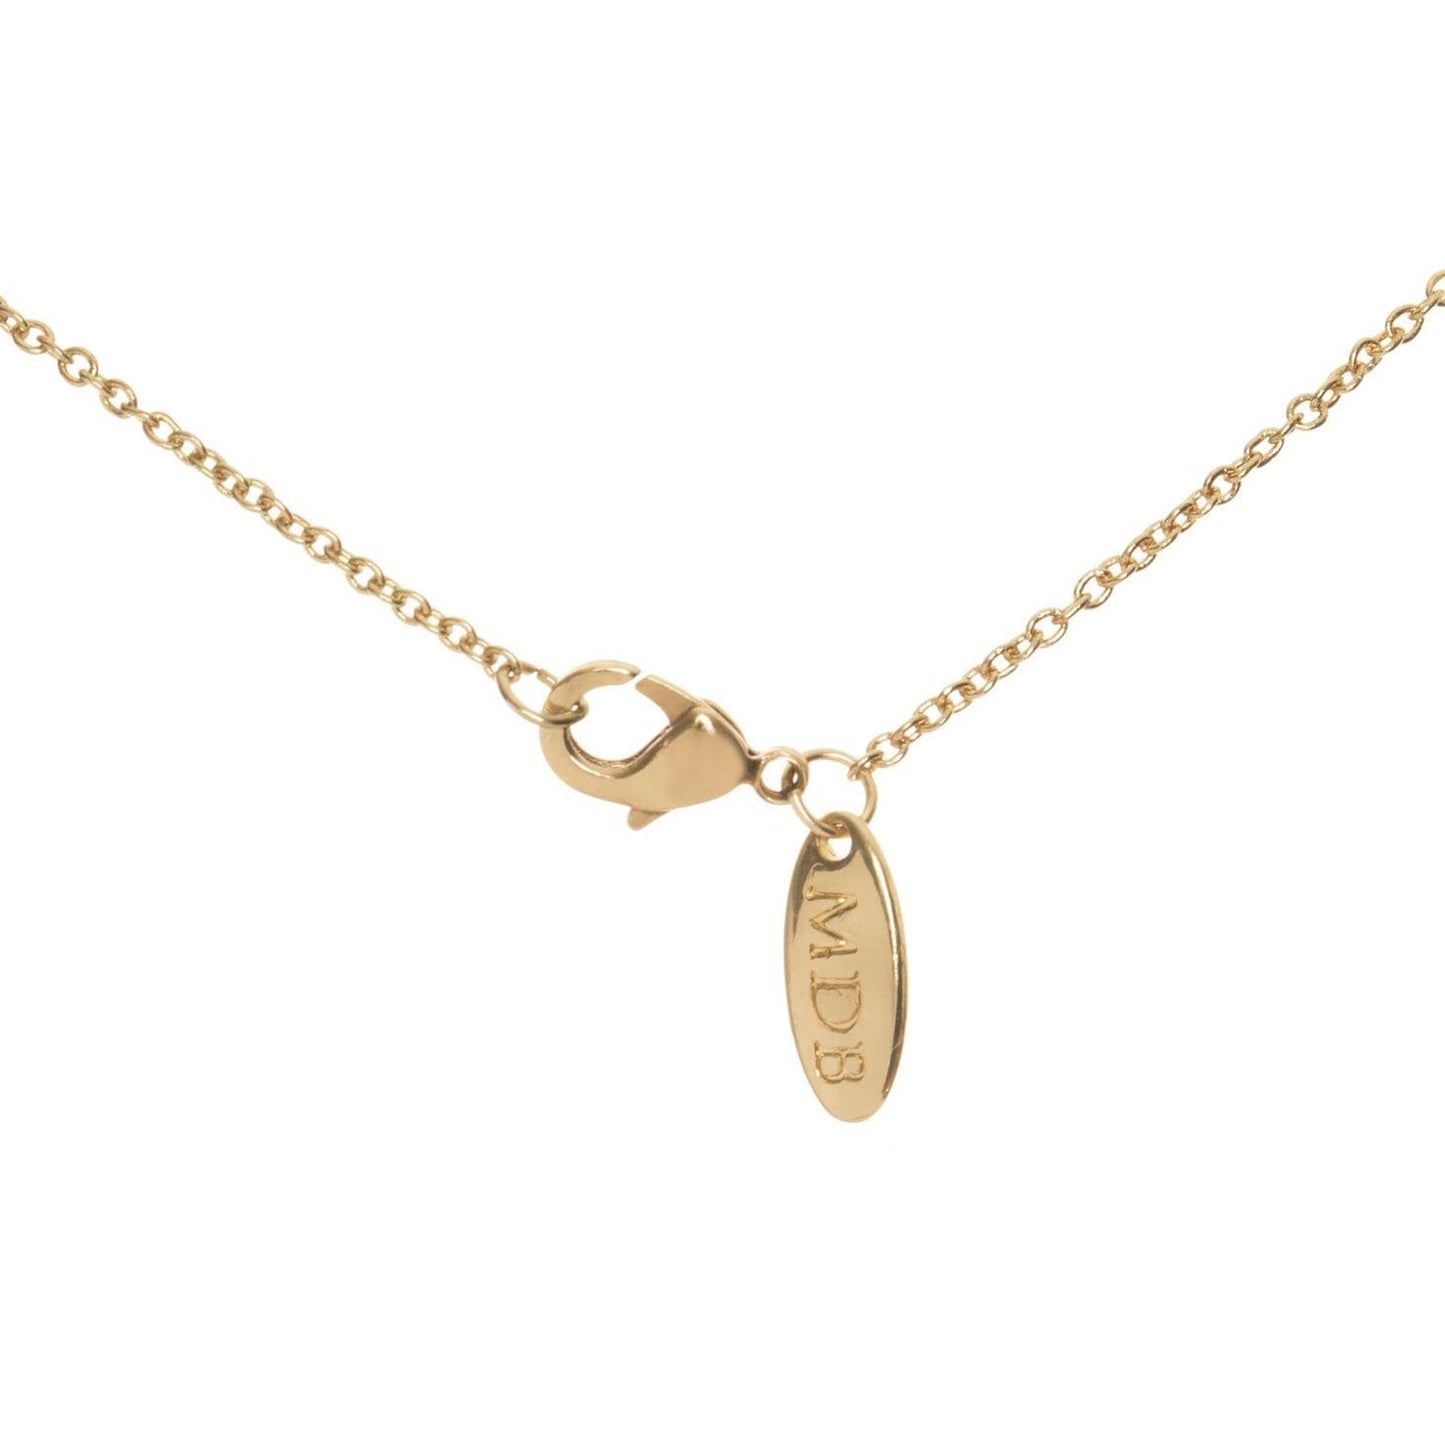 Lumiela Personalized Nameplate Molly Necklace in Gold Tone